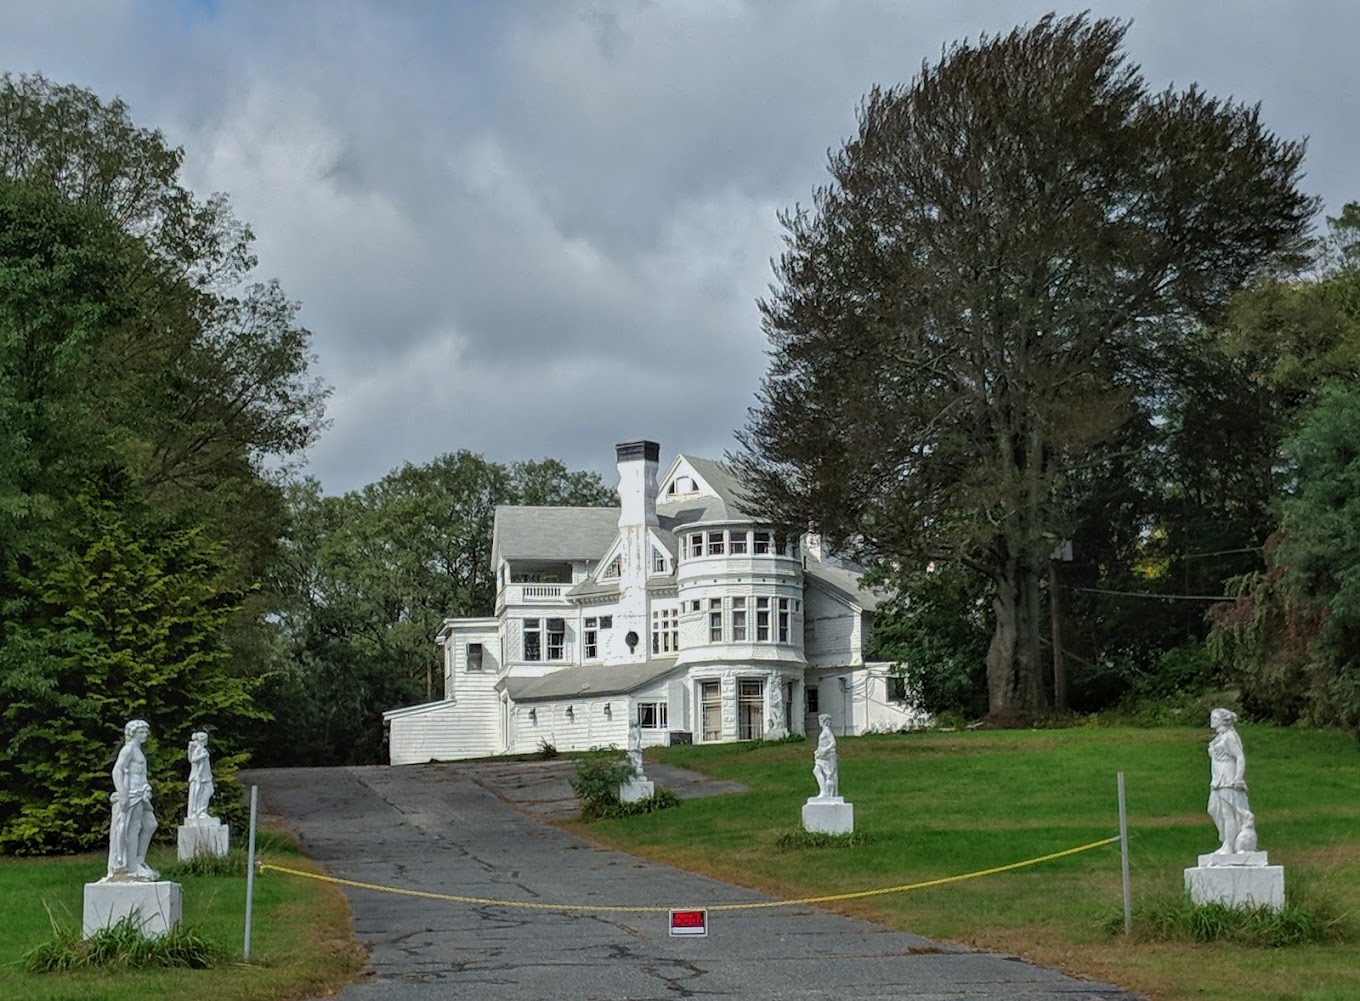 the White Cliff in Northborough, Massachusetts Metrowest Limousine visitor often visit here